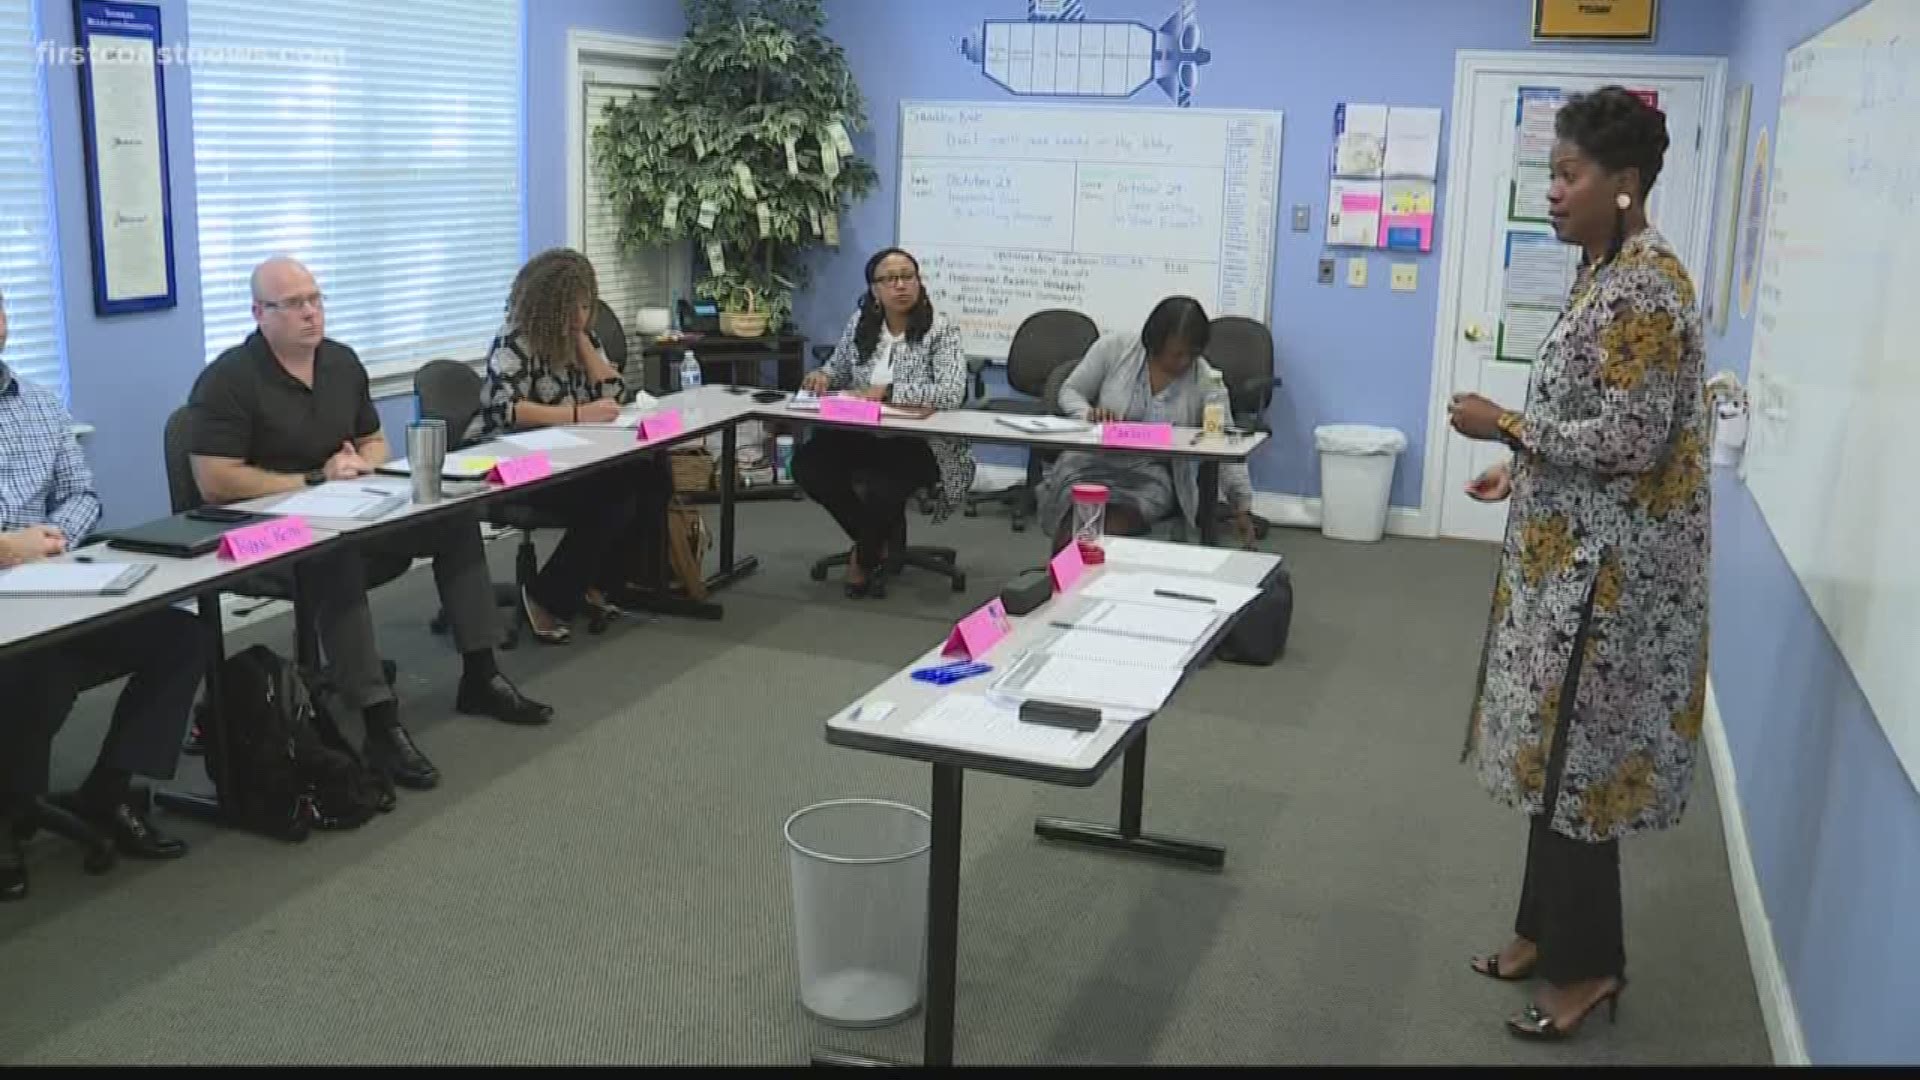 A local non-profit is working to help veterans transition into civilian life and new careers.